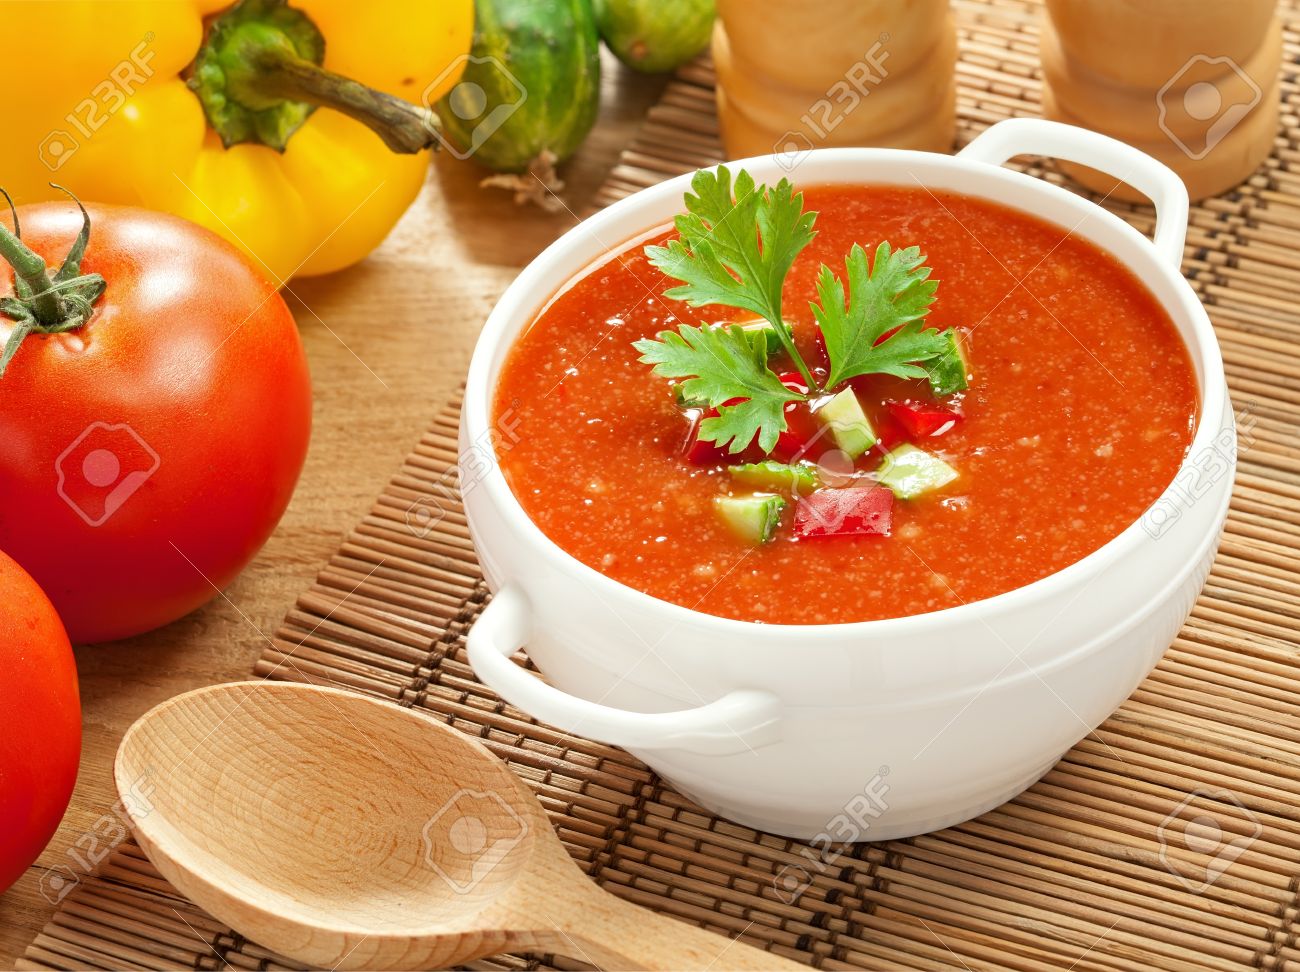 17844723-Gazpacho-and-ingredients-on-a-table-vegetable-soup-Stock-Photo